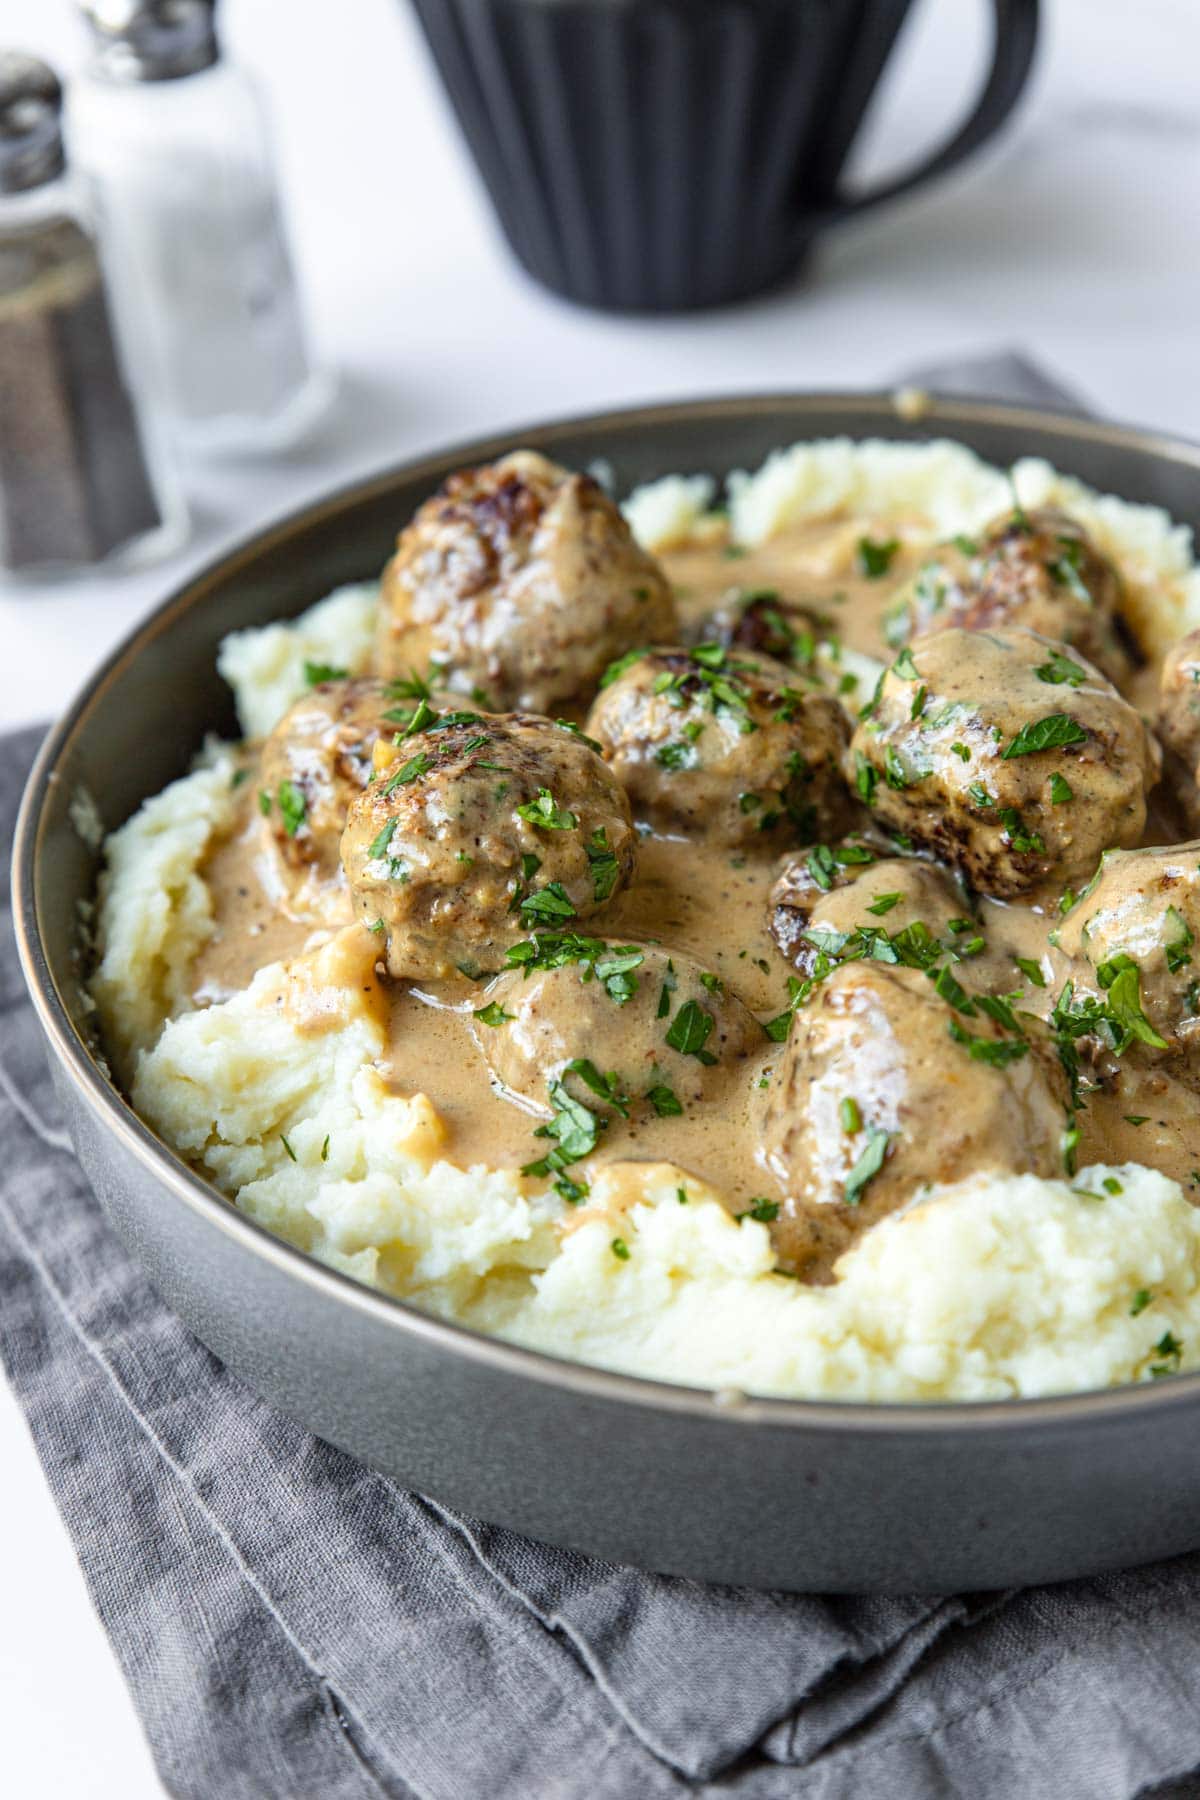 mashed potatoes topped with meatballs and brown sauce